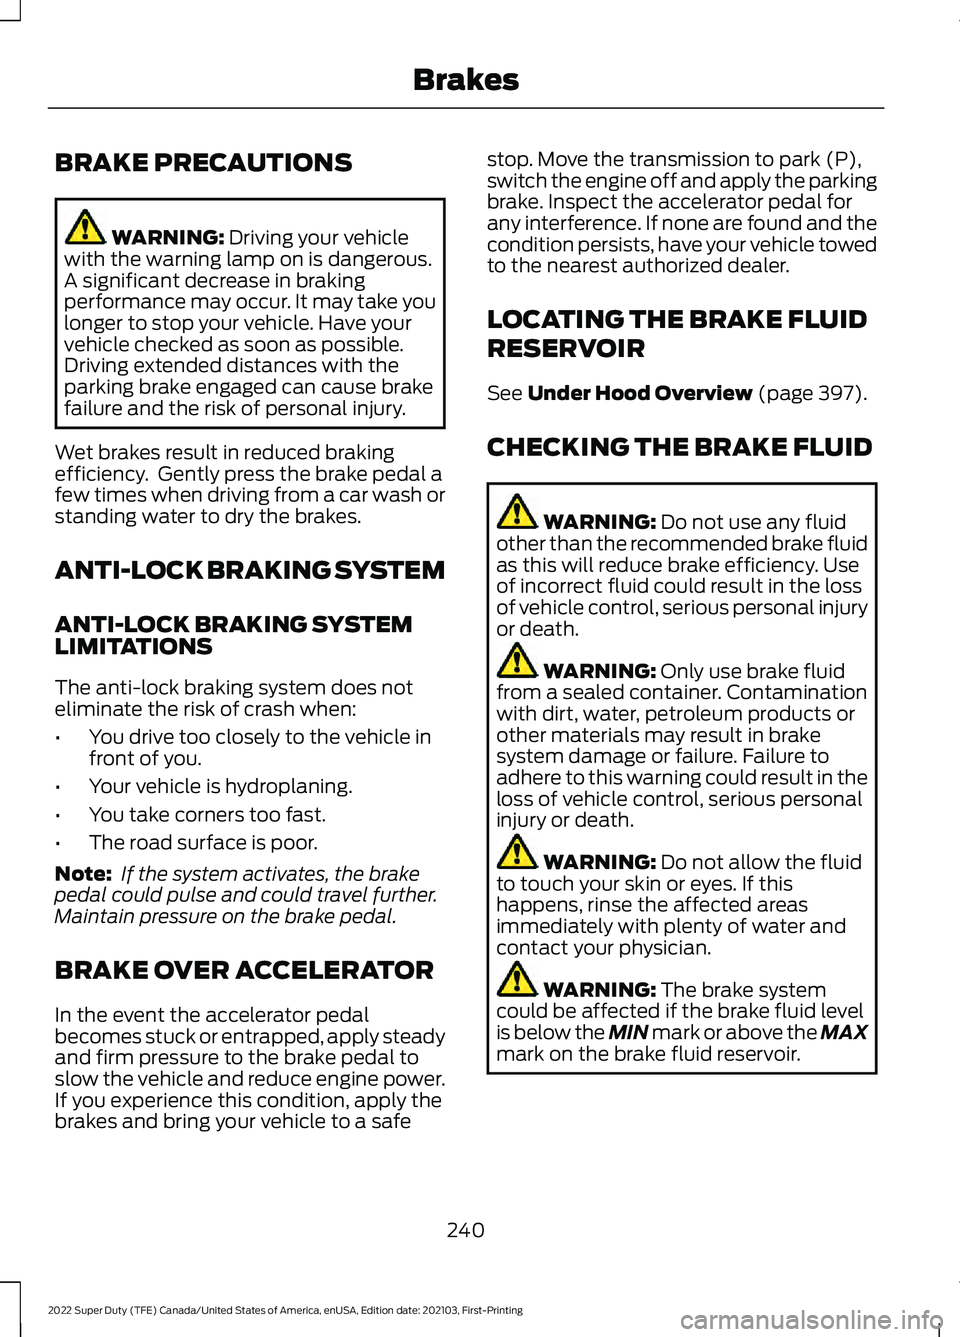 FORD F-450 2022  Owners Manual BRAKE PRECAUTIONS
WARNING: Driving your vehicle
with the warning lamp on is dangerous.
A significant decrease in braking
performance may occur. It may take you
longer to stop your vehicle. Have your
v